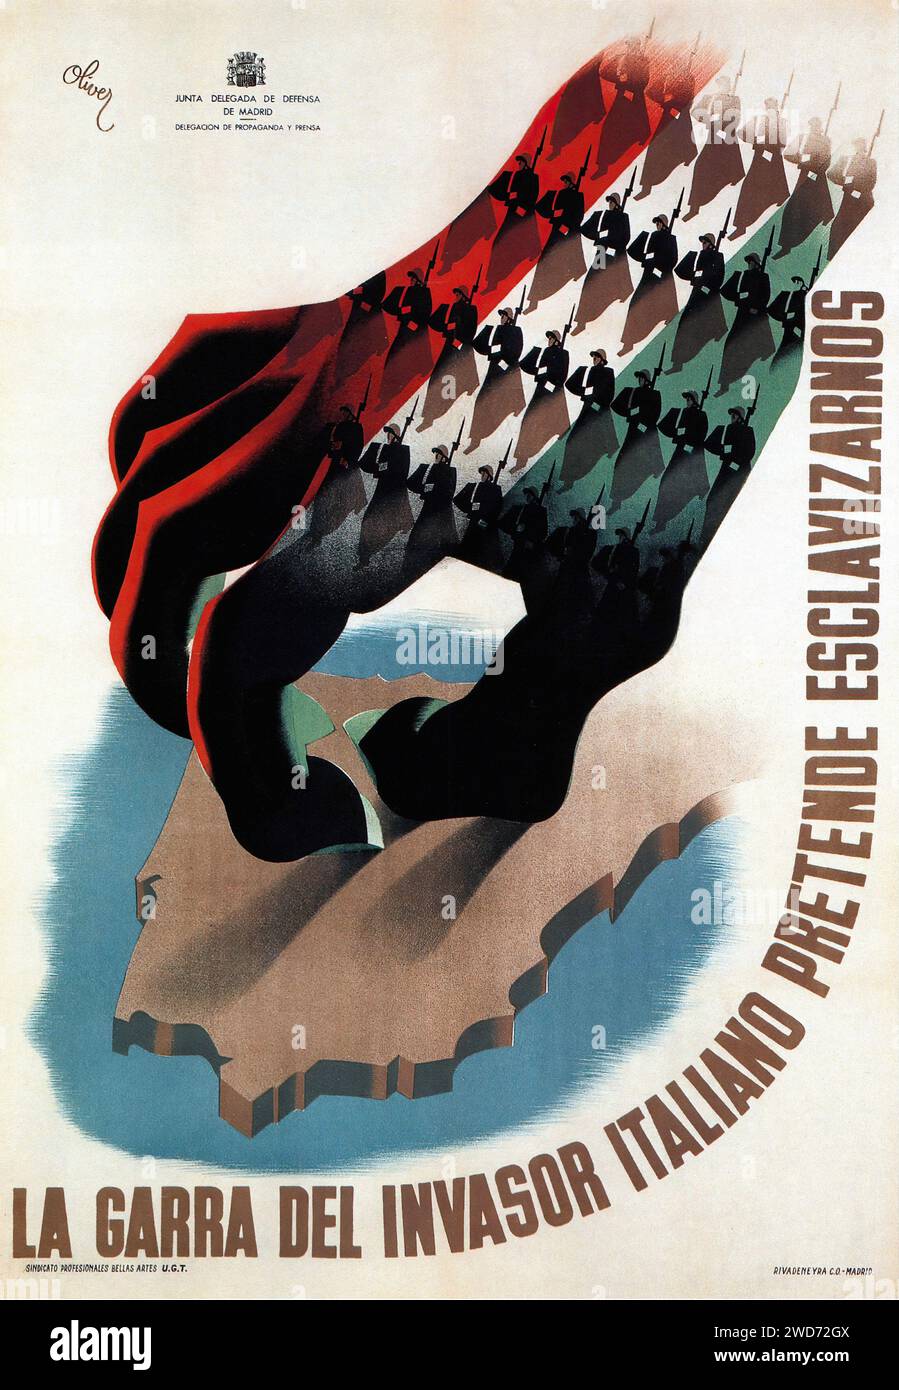 ' La garra del invasor italiano pretende esclavizarnos.' '  The claw of the Italian invader intends to enslave us.' This 1937 propaganda poster by Oliver graphically depicts the threat of Italian fascism as a menacing claw over the Spanish landscape, with a line of soldiers marching in resistance. The artwork uses a stylized, surreal approach with a limited color palette to symbolize the danger and the defiance against it. It is an example of political surrealism, using powerful imagery to evoke an emotional response and inspire resistance. Keywords: - Spanish Civil War (Guerra Civil Española) Stock Photo